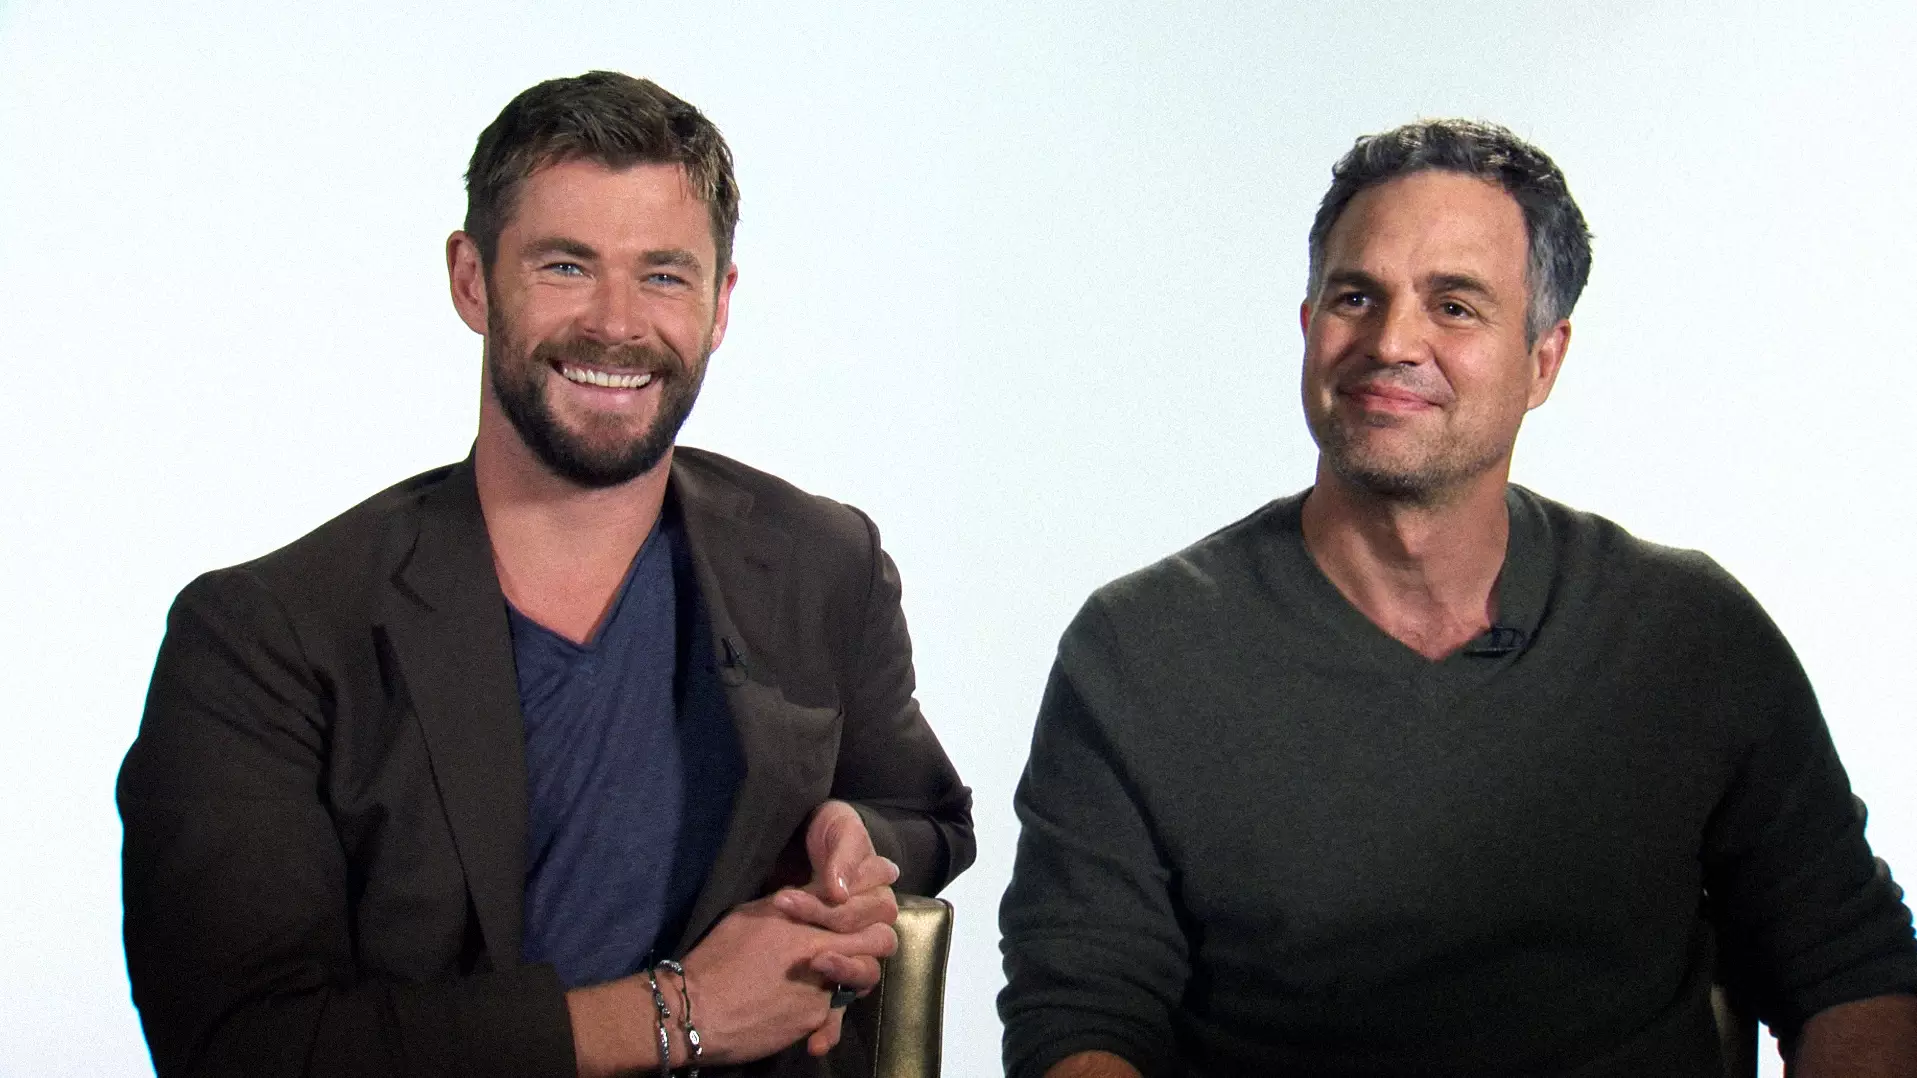 ​The Stars Of Marvel’s 'Thor: Ragnarok' Talk Downtime Pints, Being A Hero And The Modern Day Gent